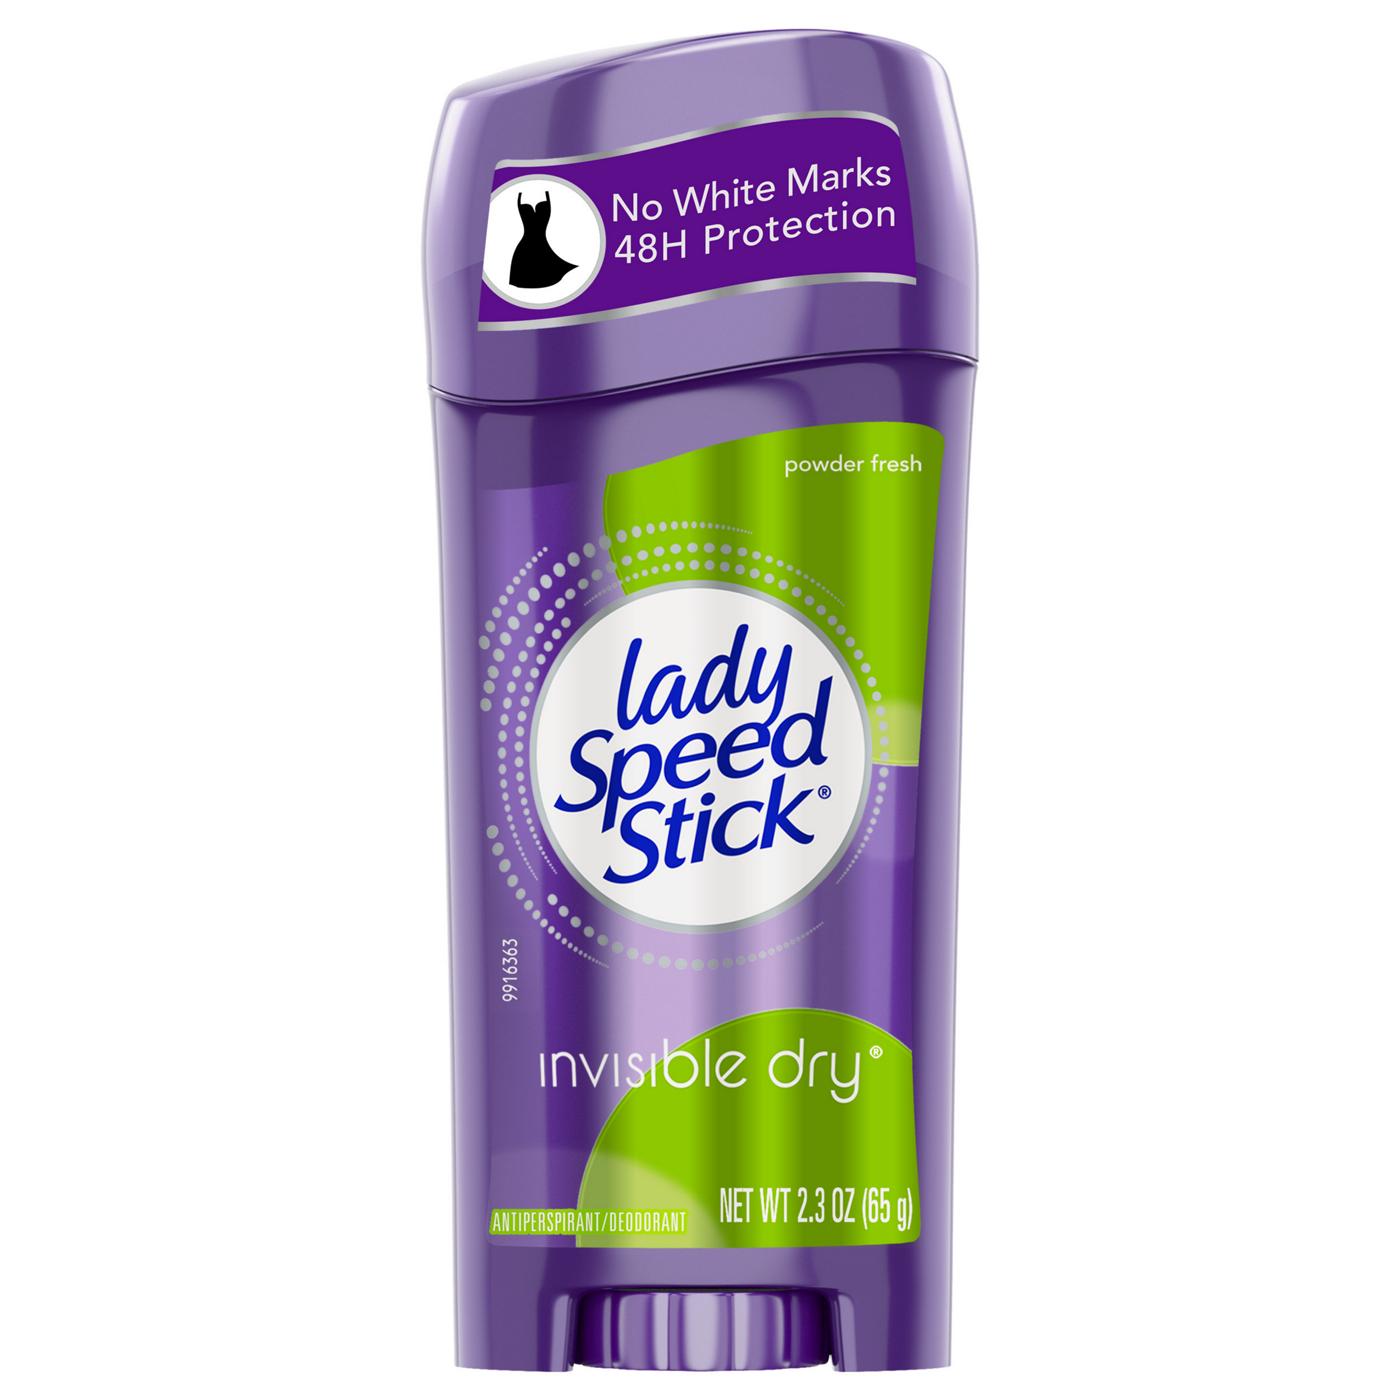 Lady Speed Stick Invisible Dry Deodorant - Powder Fresh; image 1 of 9